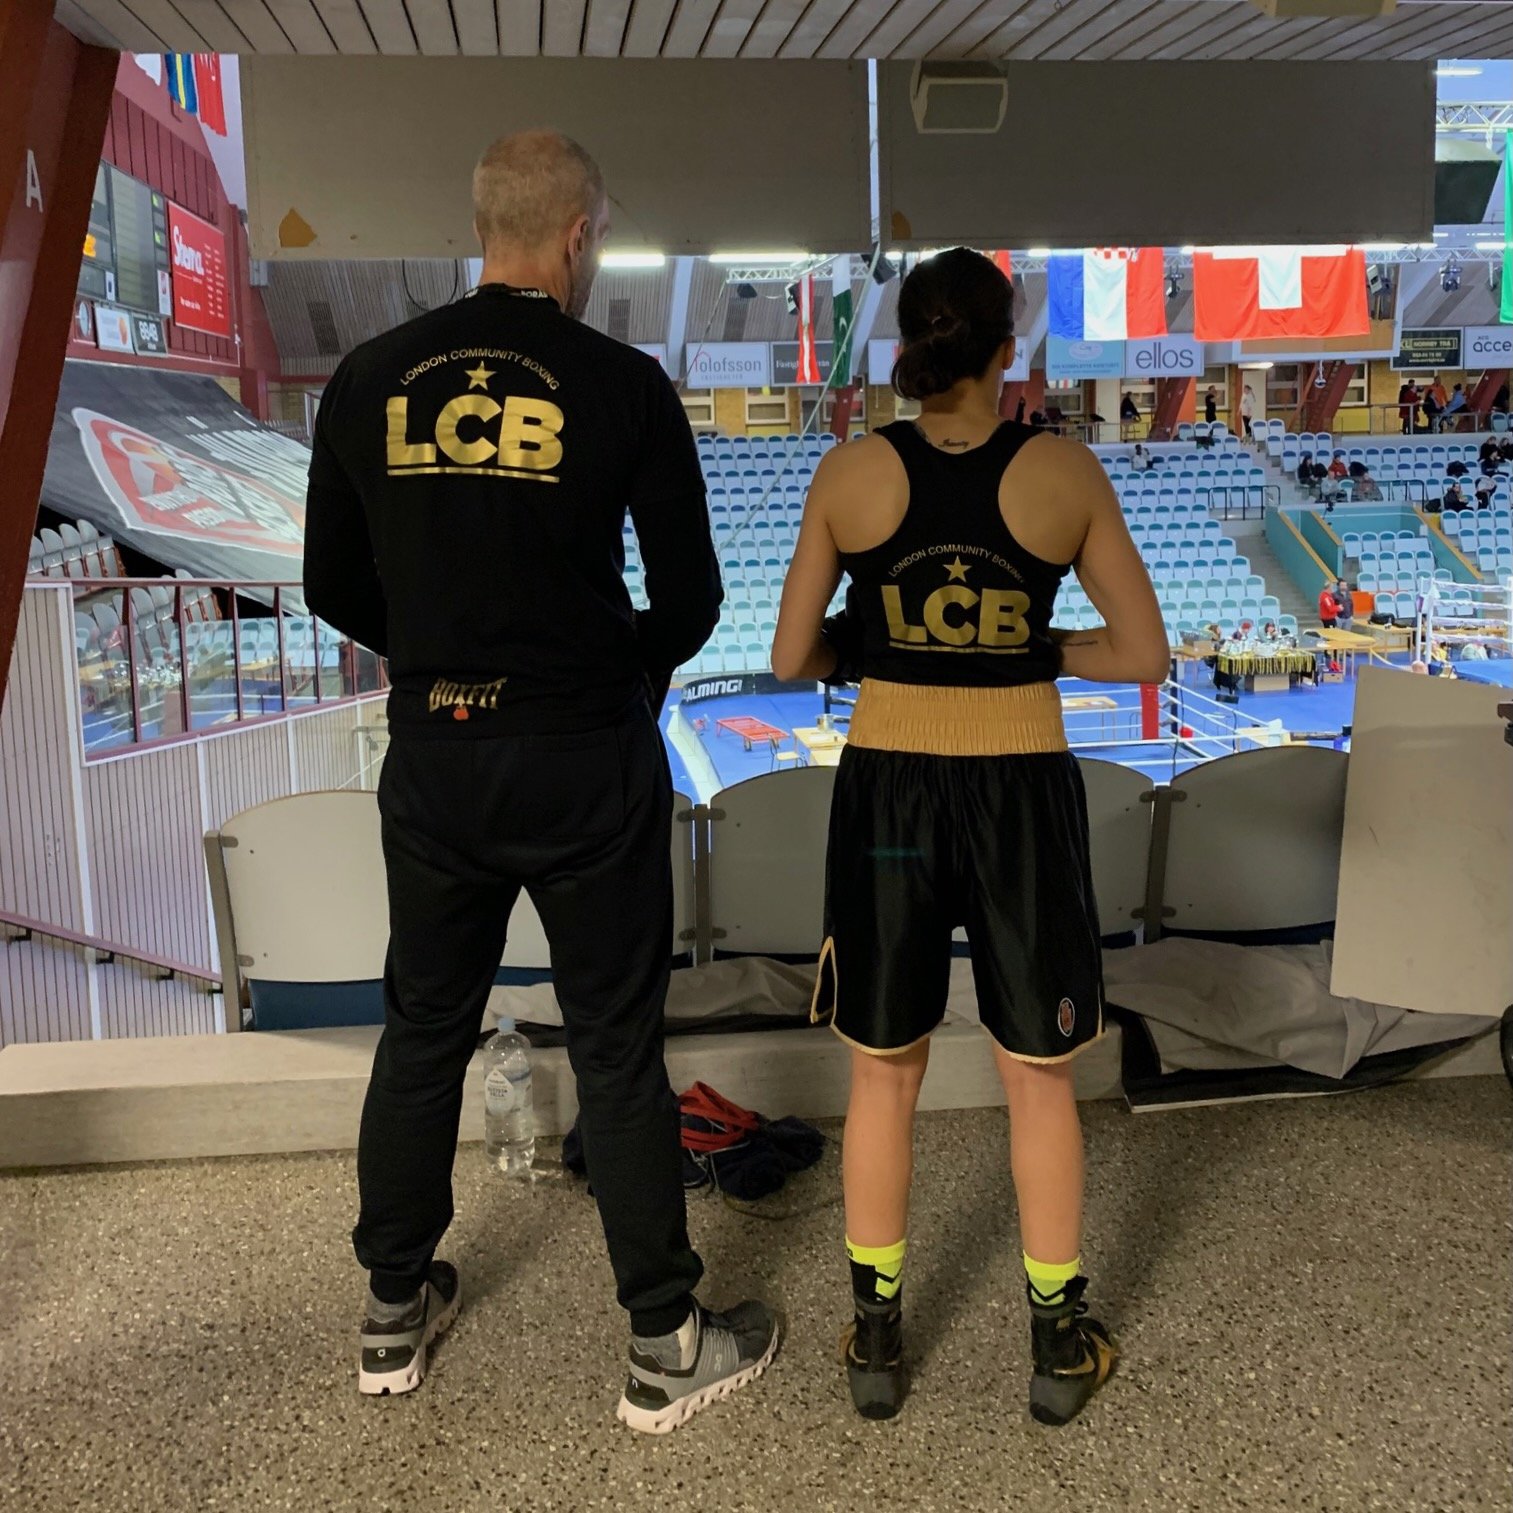 Coach "Lodgie" and Ali Richards repping LCB in Sweden